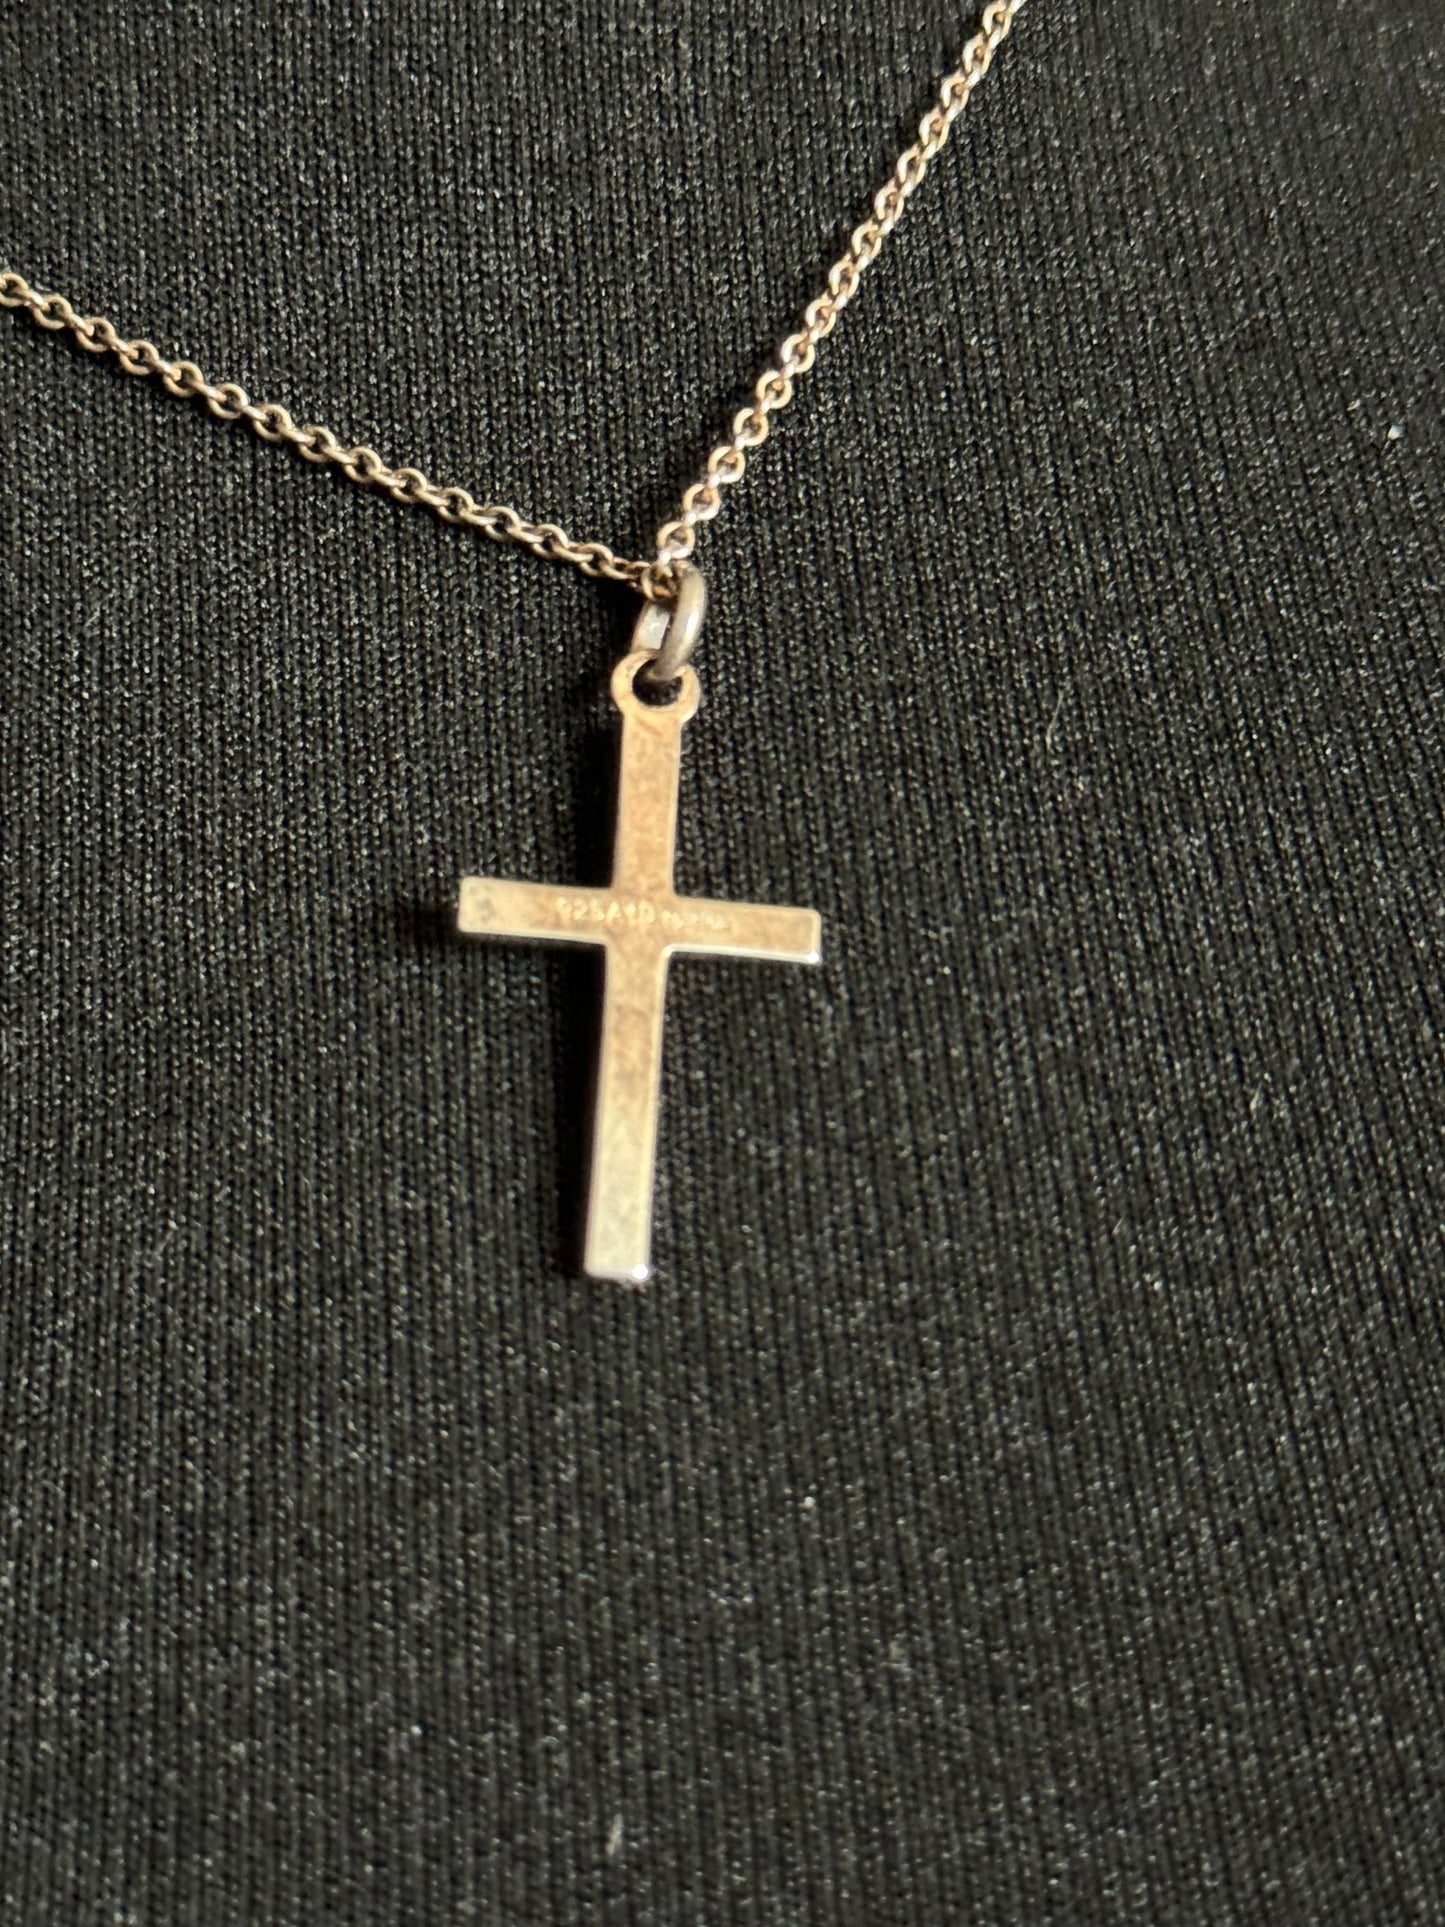 925 Sterling silver plain religious cross pendant necklace on chain